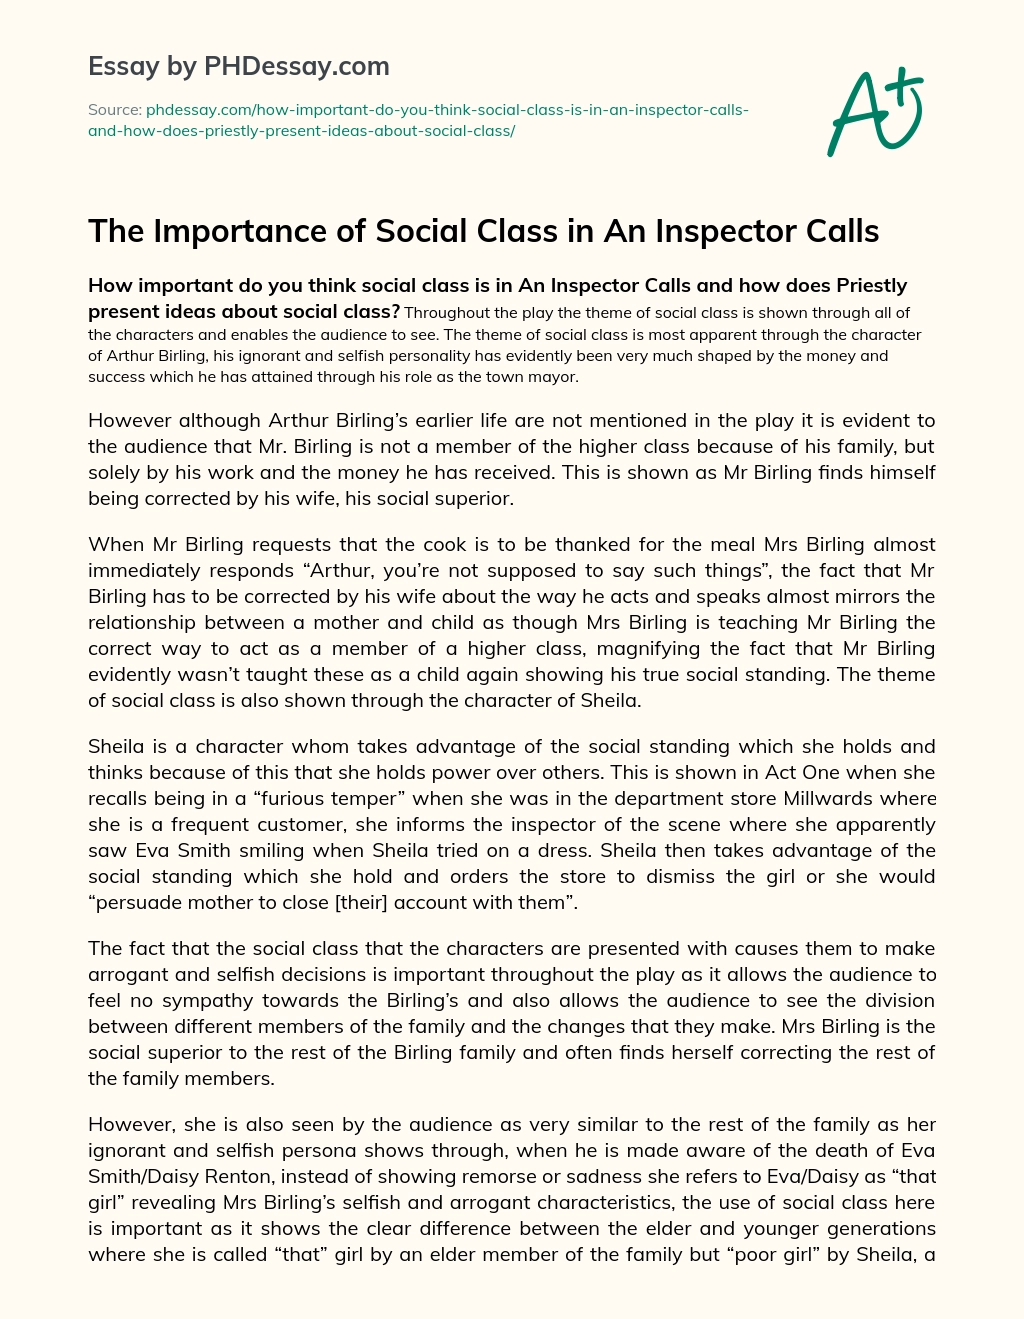 The Importance of Social Class in An Inspector Calls essay